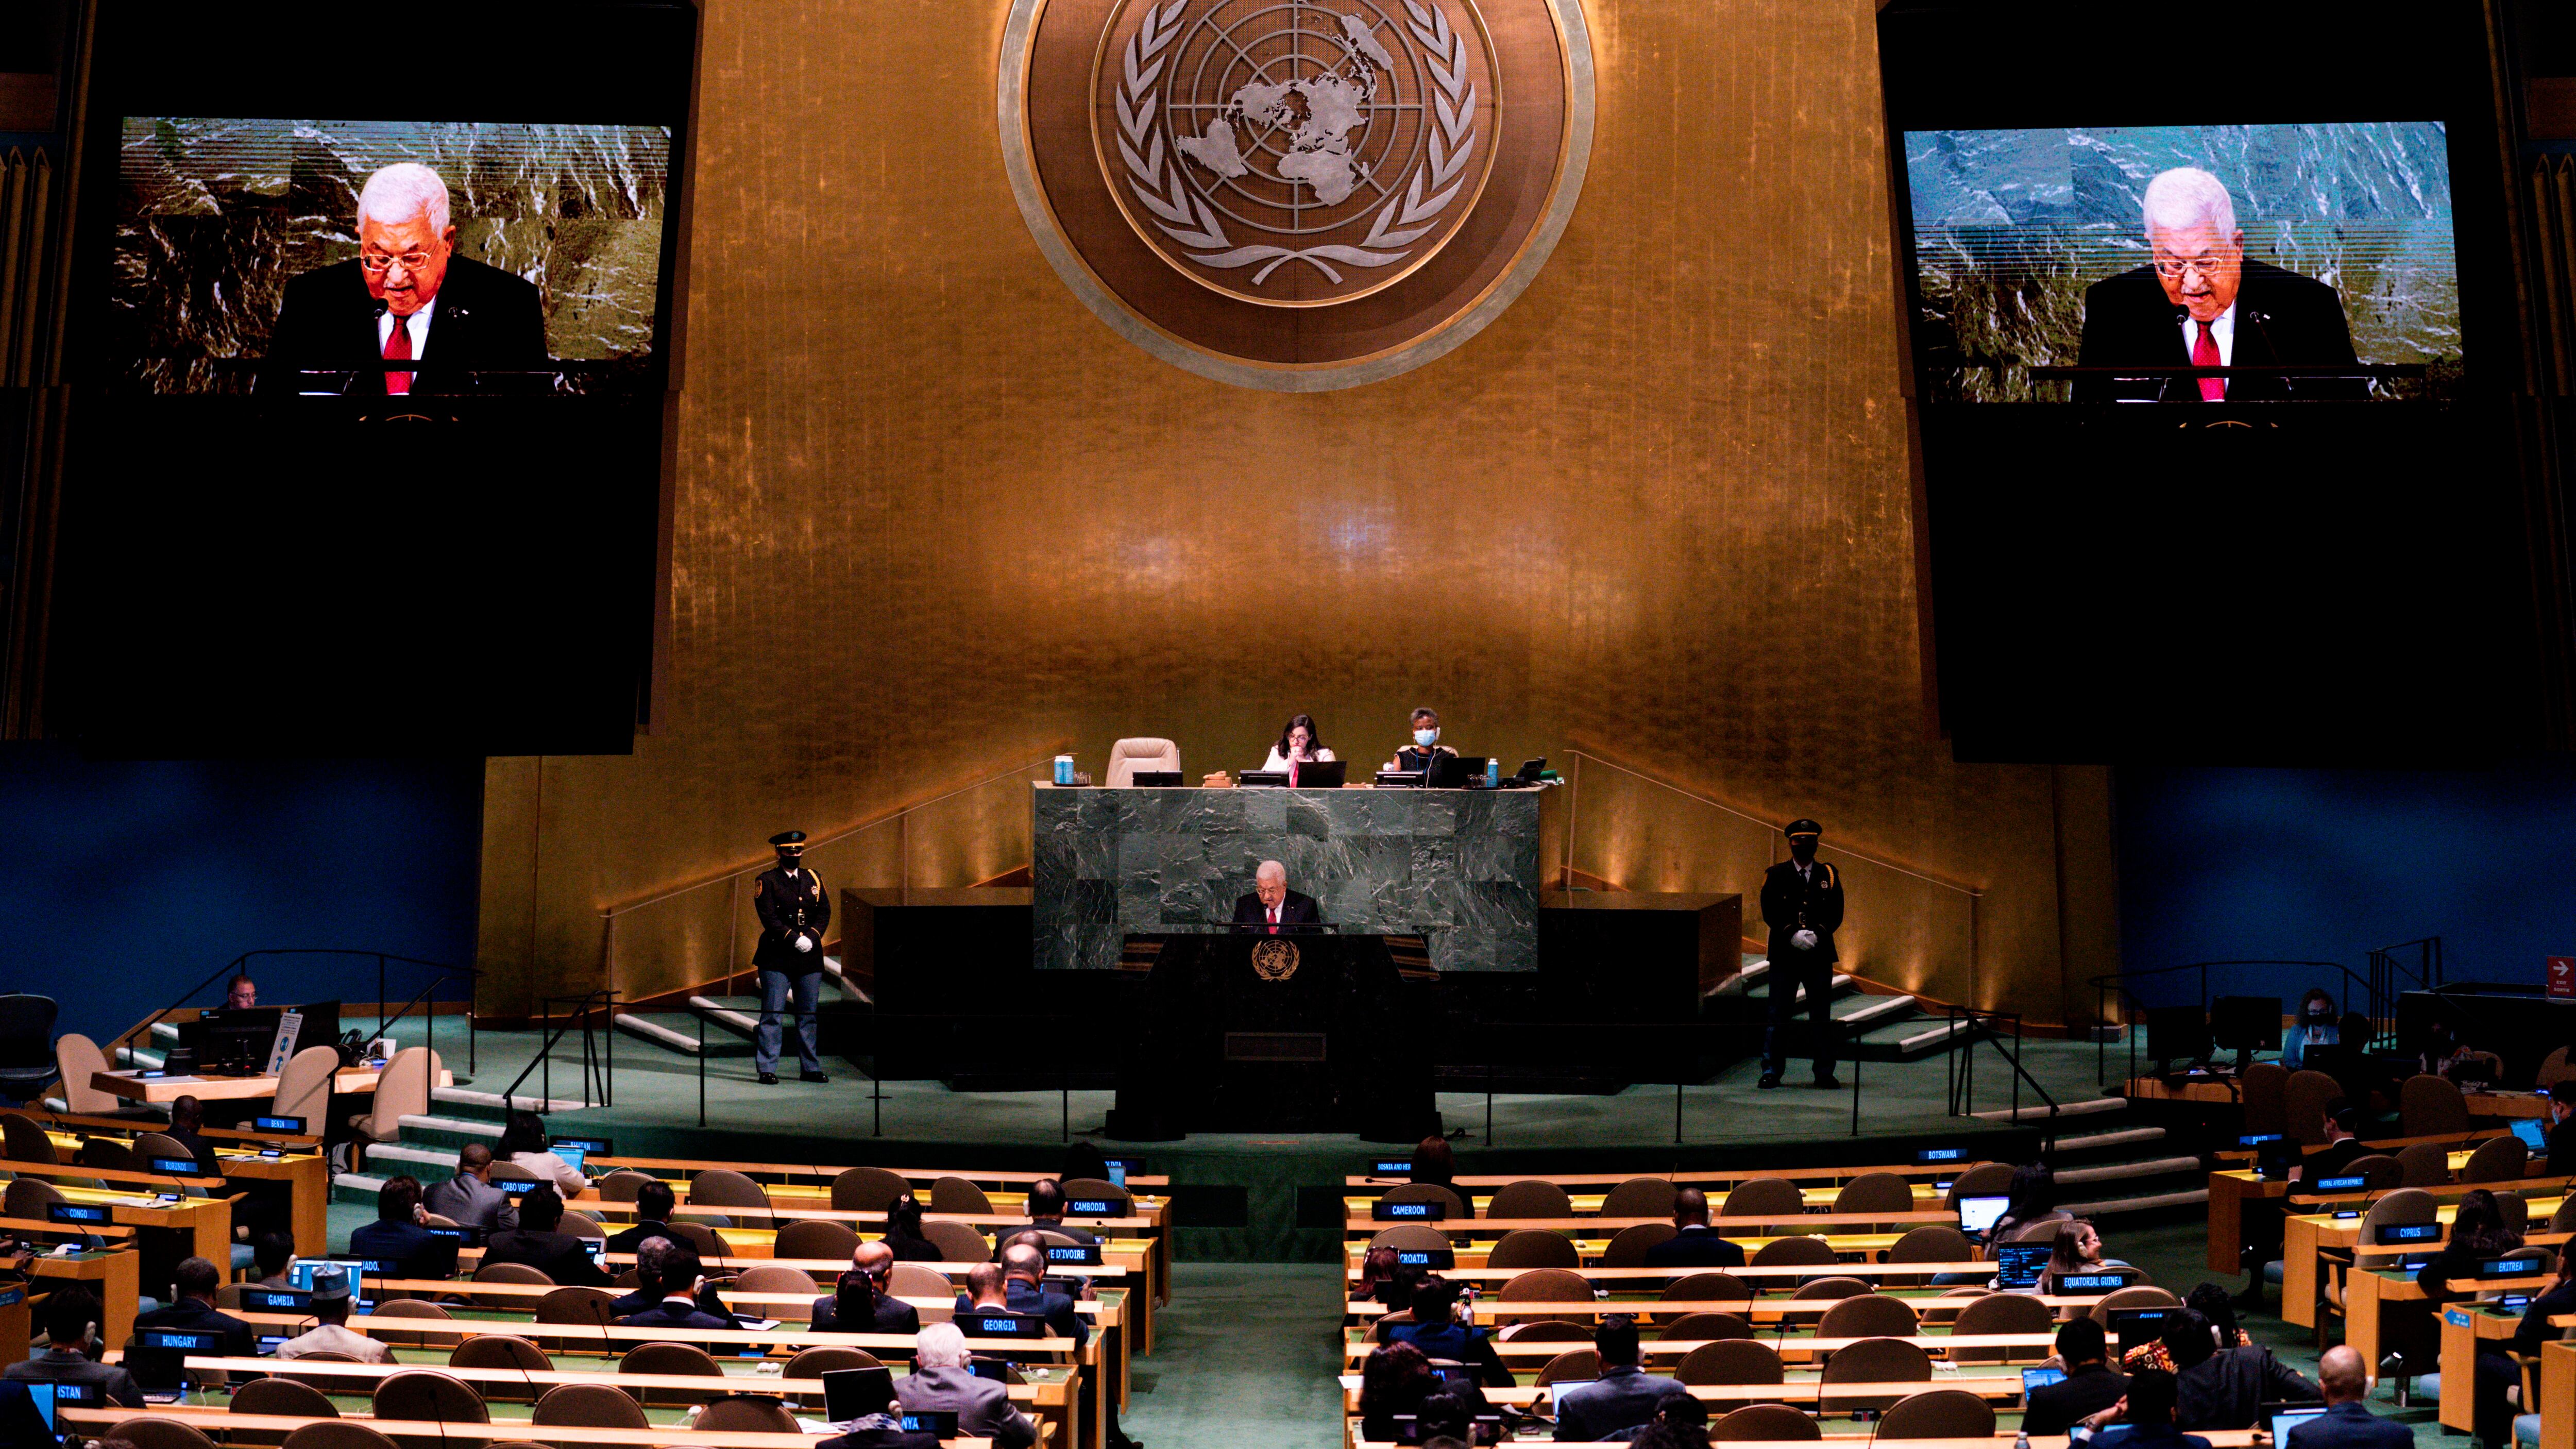 Mahmoud Abbas addressing the 77th session of the United Nations General Assembly in 2022 (Julia Nikhinson/AP)